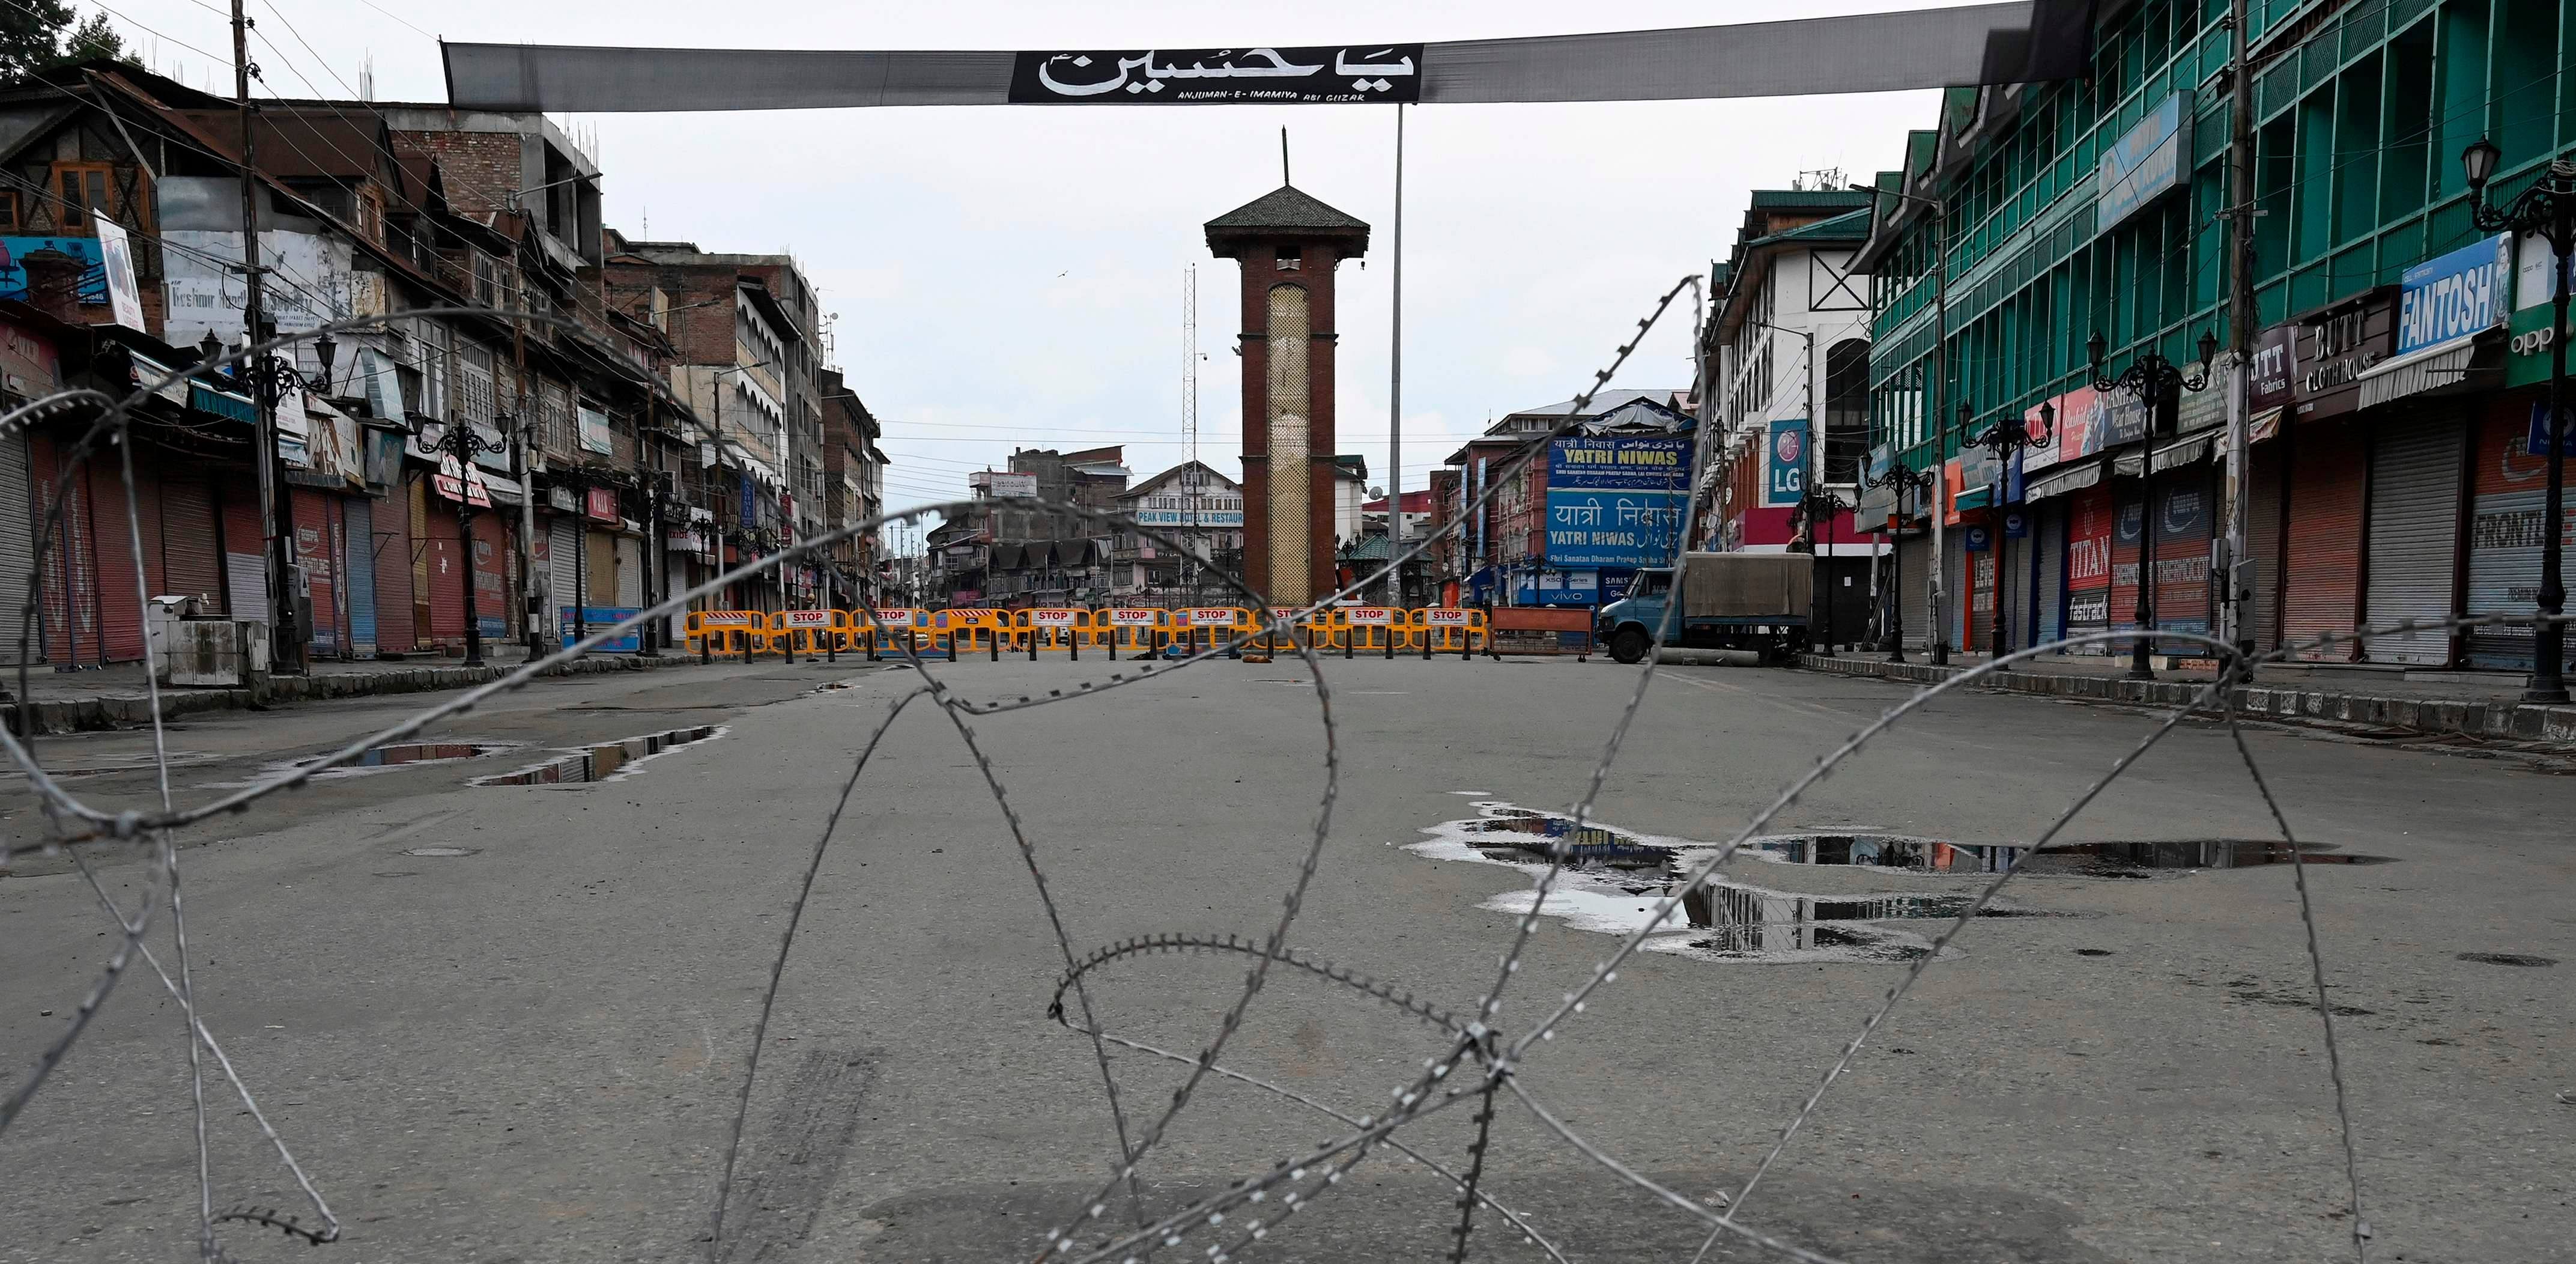 For the first time after the abrogation of Article 370 on August 5 last year, regional People’s Democratic Party (PDP) held a meeting of party leaders in Srinagar. Repreentative image/Credit: AFP